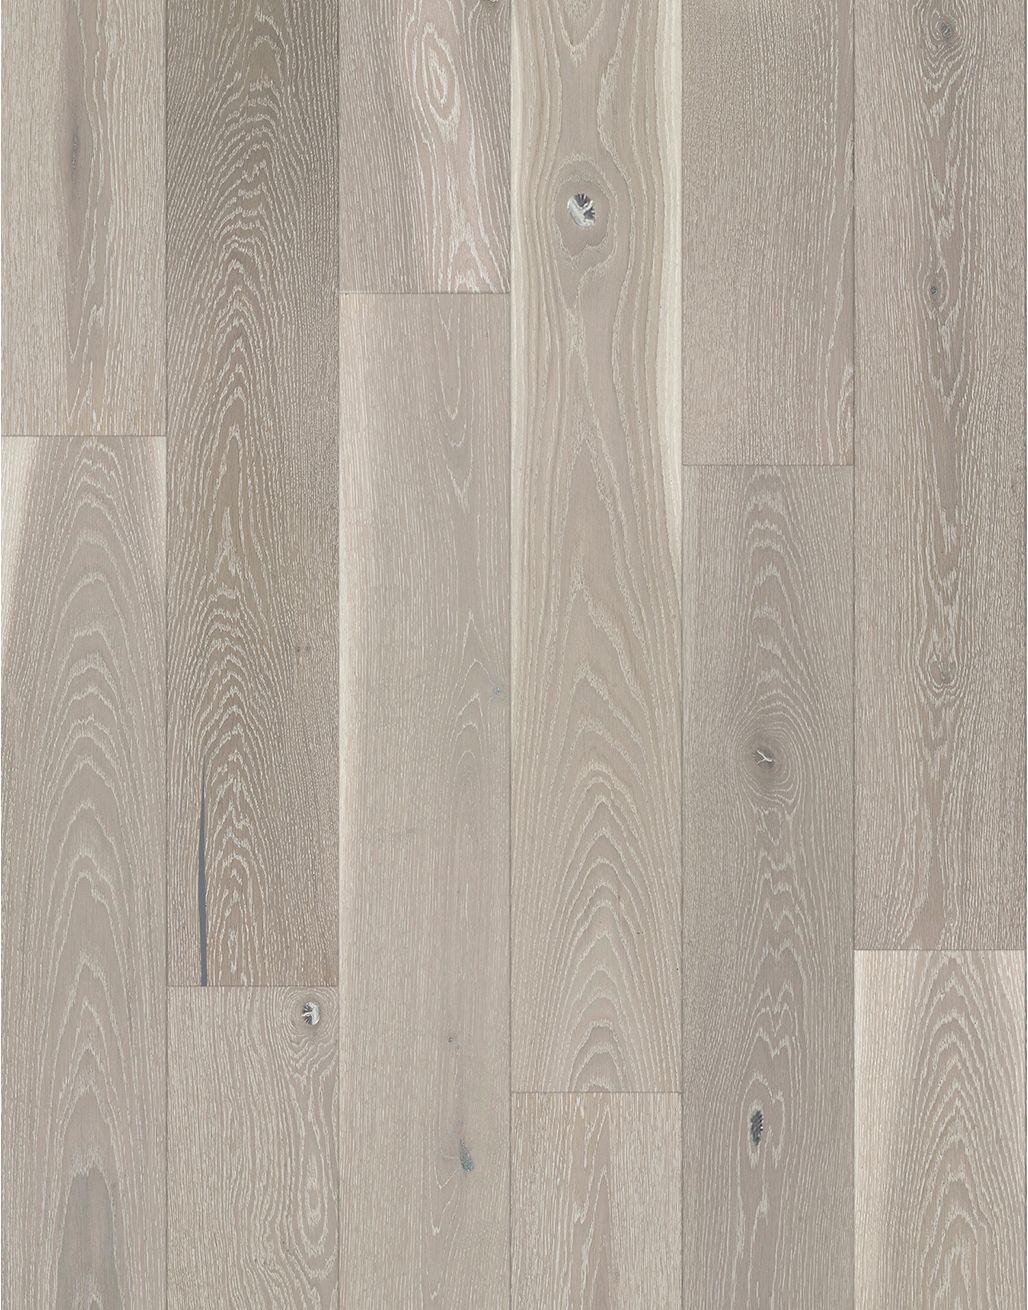 Carpenters Choice Stoney Grey 180mm x 1800mm Lacquered Engineered Wood Flooring 1